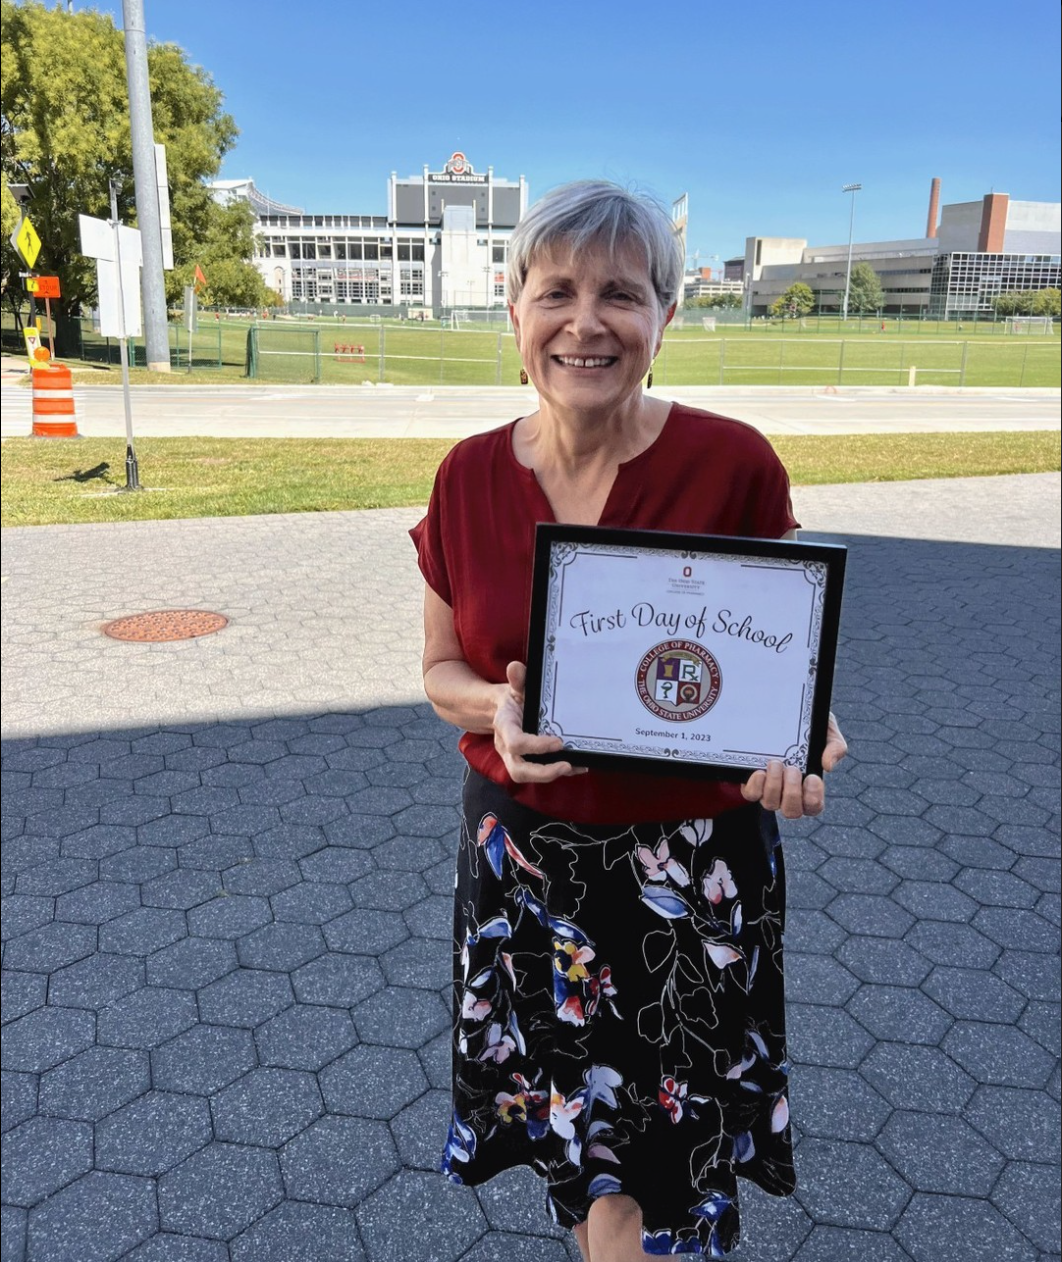 Dean Kroetz posing with a "First Day of School" plaque